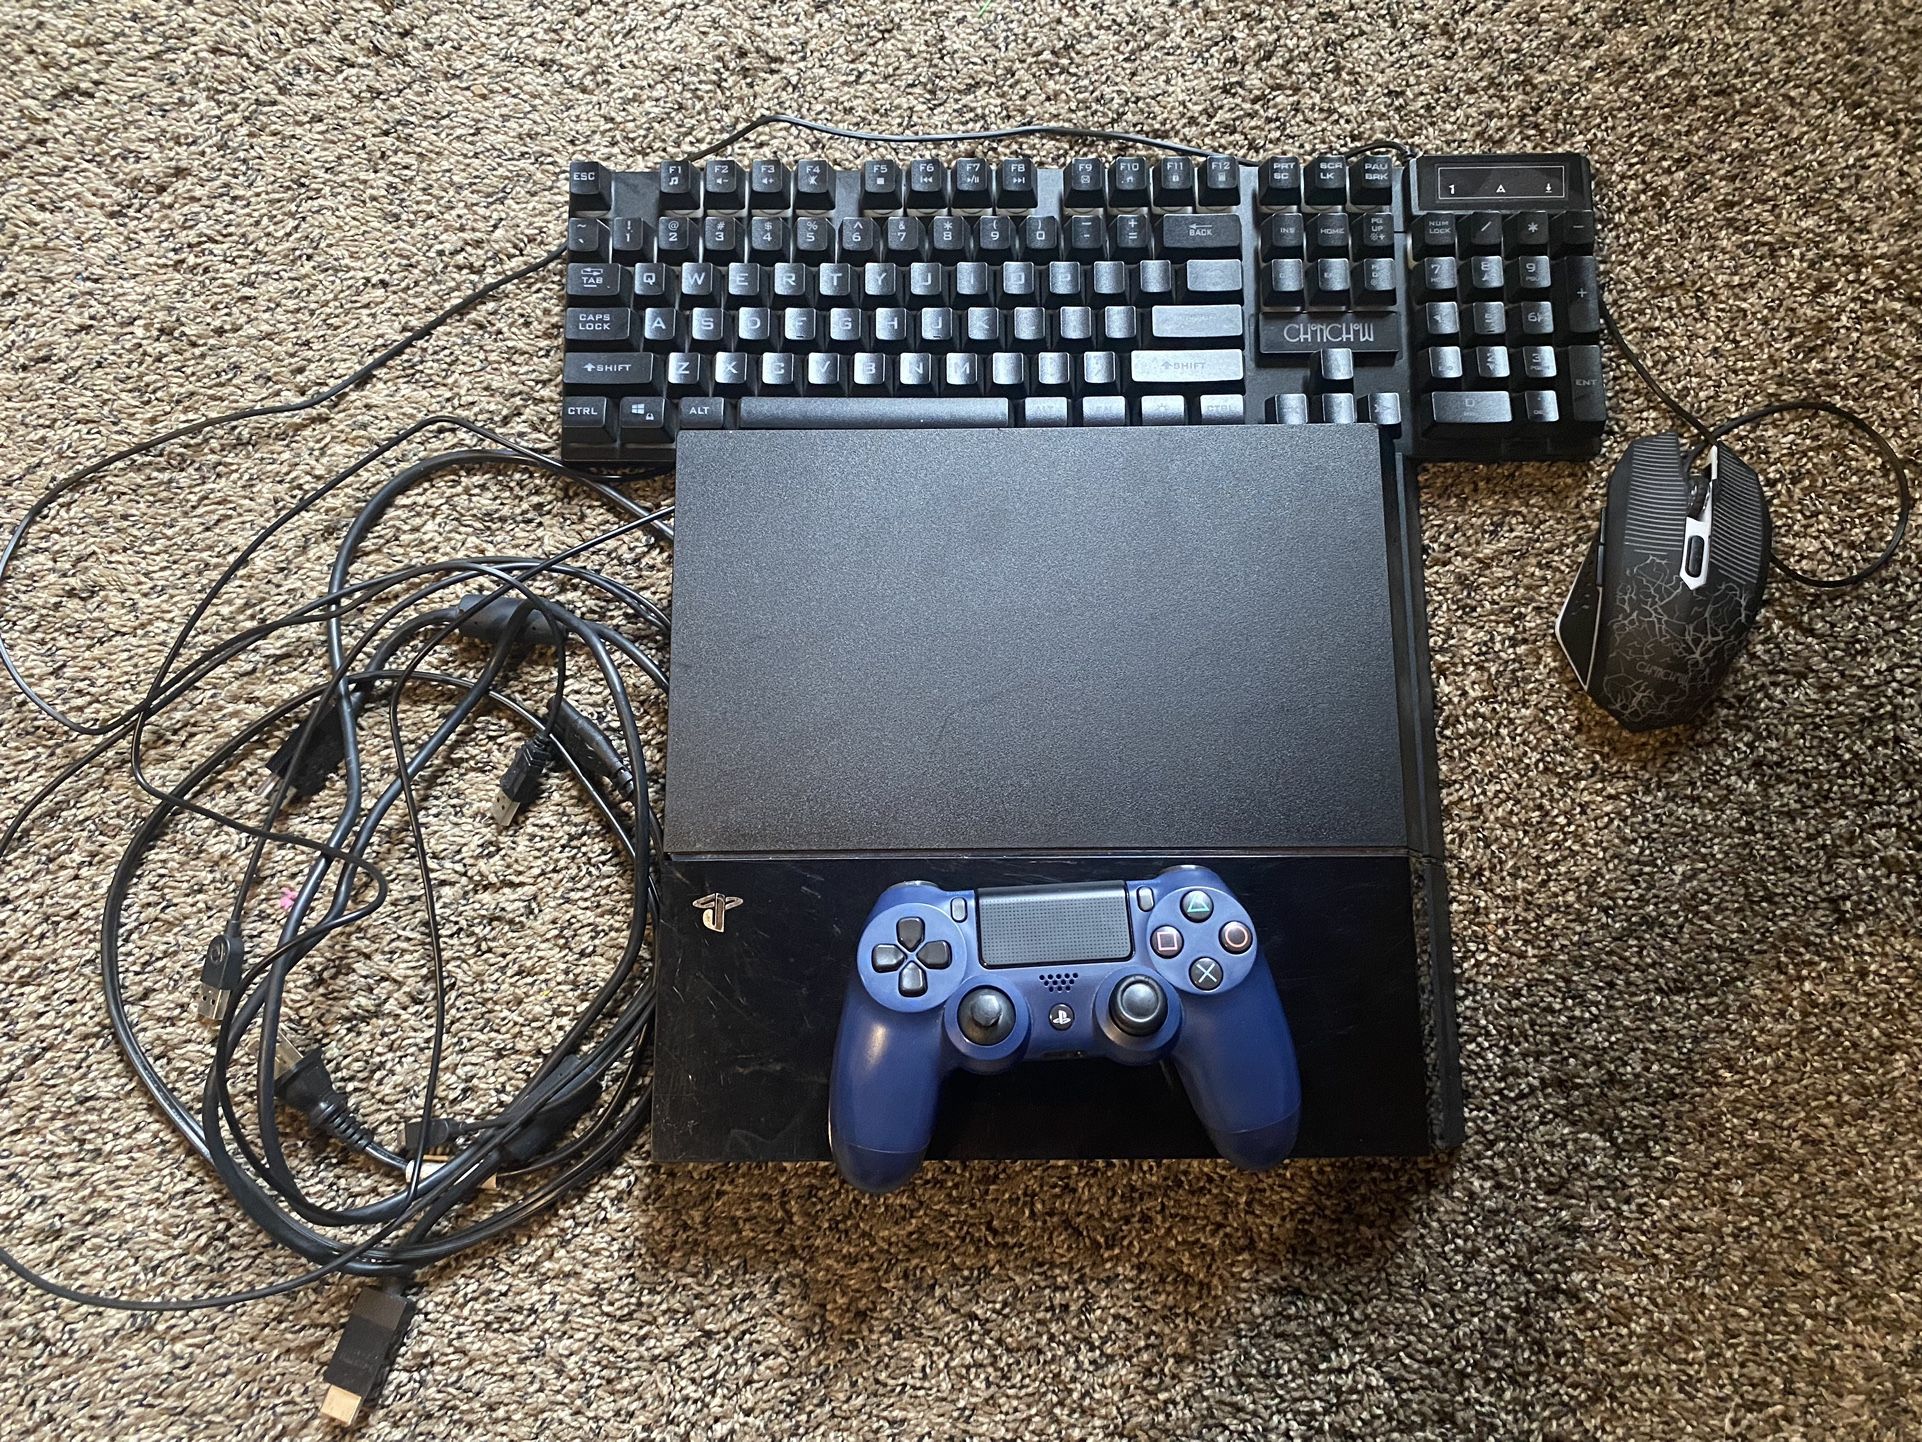 PS4 with games/dual shock controller and nearly new keyboard. All wires also included.